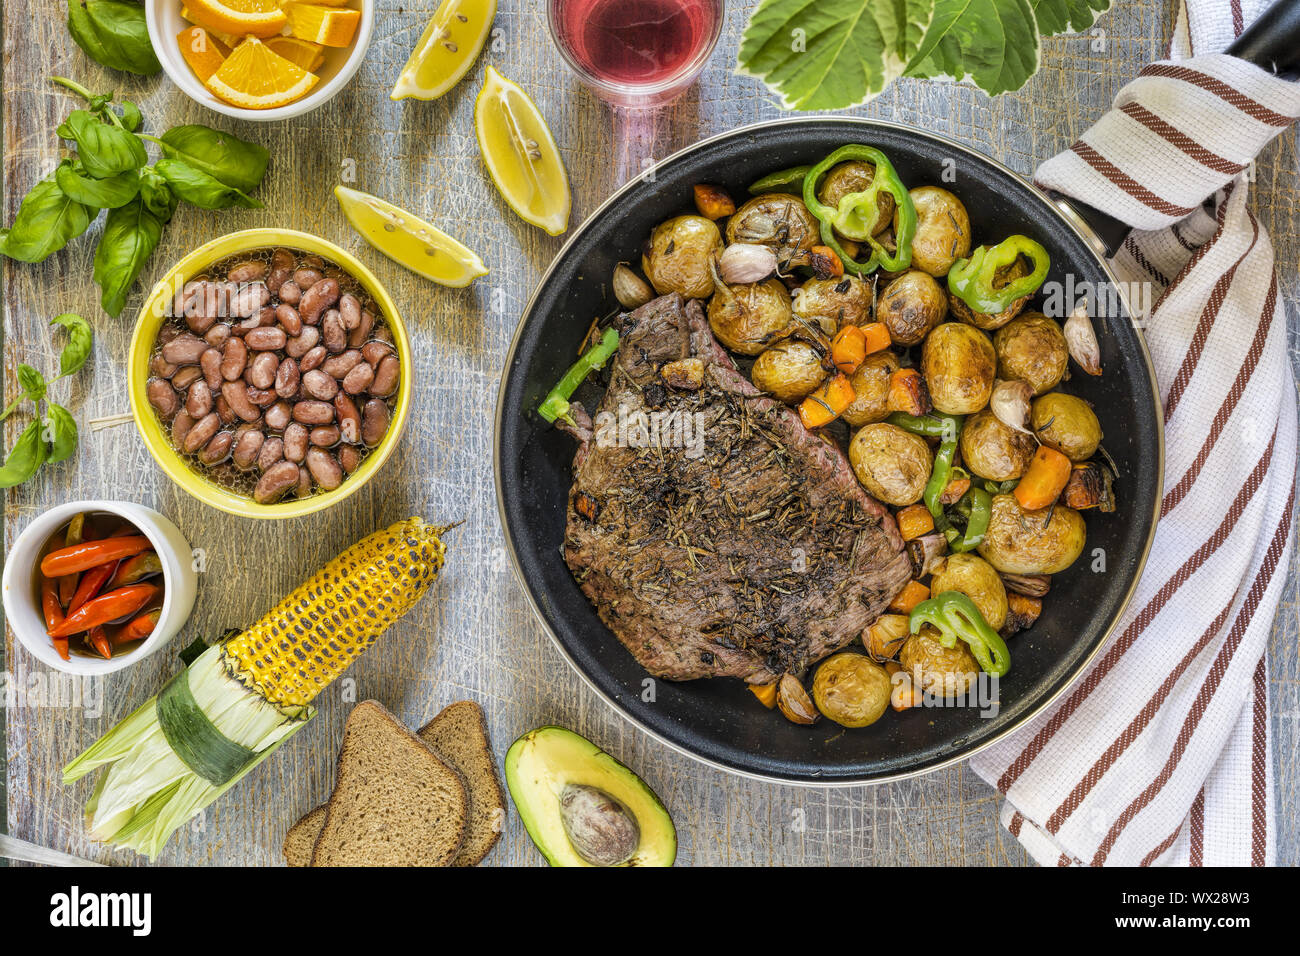 Juicy steak, table served, grilled vegetables, green basil, dining table Stock Photo